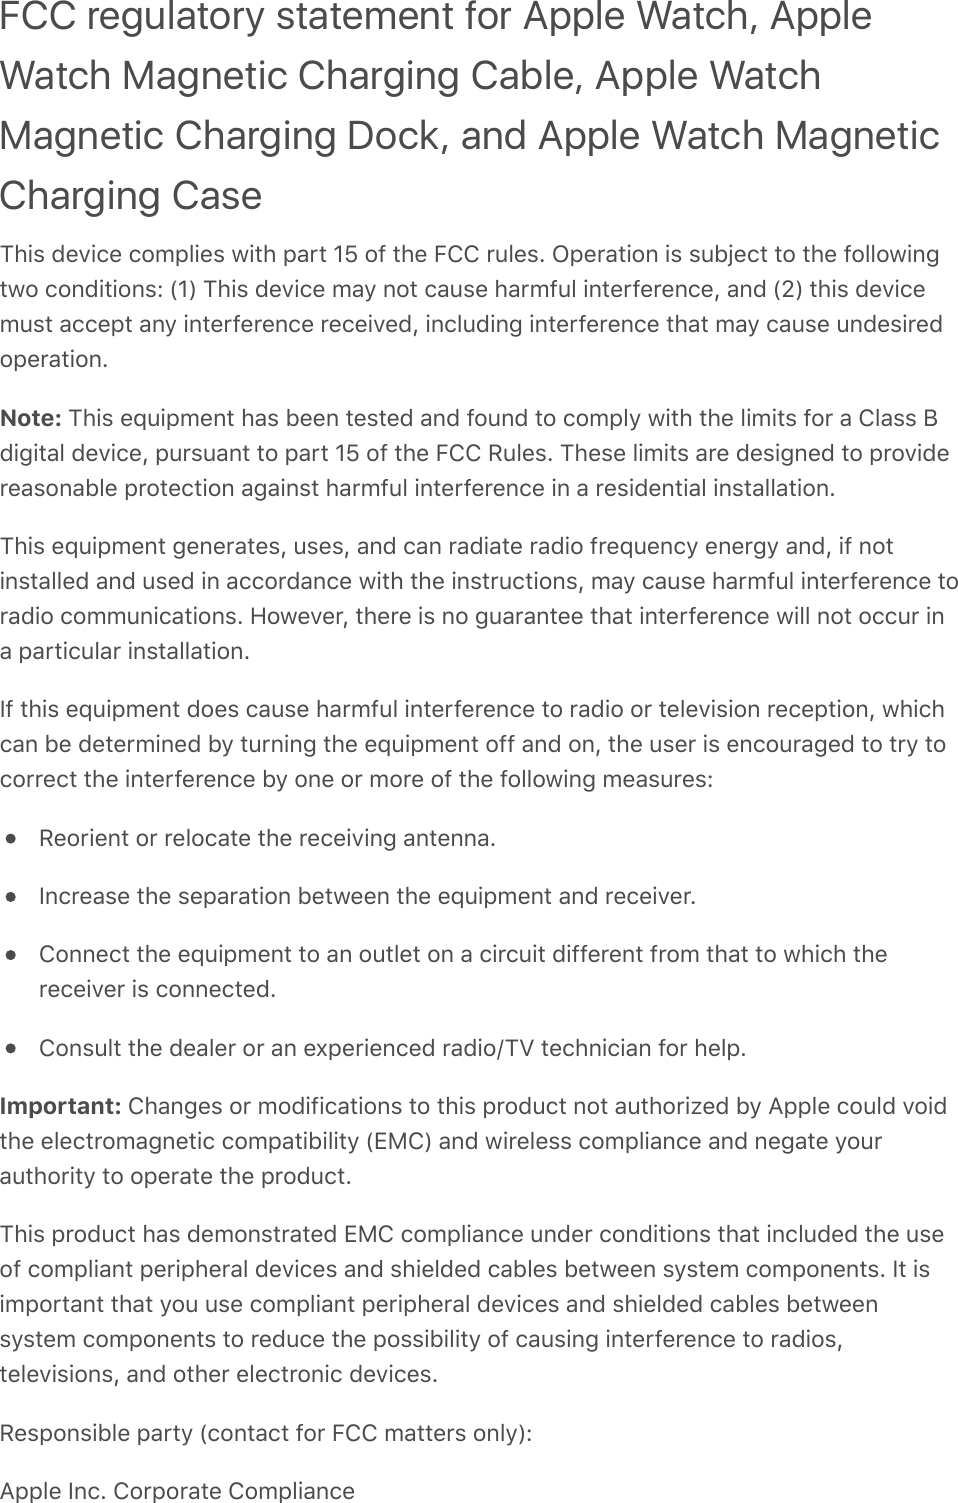 FCC regulatory statement for Apple Watch, AppleWatch Magnetic Charging Cable, Apple WatchMagnetic Charging Dock, and Apple Watch MagneticCharging Case@)+$&amp;8%:+(%&amp;(#;C&quot;+%$&amp;0+/)&amp;C&apos;*/&amp;XZ&amp;#=&amp;/)%&amp;H!!&amp;*2&quot;%$?&amp;MC%*&apos;/+#,&amp;+$&amp;$2&gt;P%(/&amp;/#&amp;/)%&amp;=#&quot;&quot;#0+,-/0#&amp;(#,8+/+#,$f&amp;QXS&amp;@)+$&amp;8%:+(%&amp;;&apos;4&amp;,#/&amp;(&apos;2$%&amp;)&apos;*;=2&quot;&amp;+,/%*=%*%,(%I&amp;&apos;,8&amp;QRS&amp;/)+$&amp;8%:+(%;2$/&amp;&apos;((%C/&amp;&apos;,4&amp;+,/%*=%*%,(%&amp;*%(%+:%8I&amp;+,(&quot;28+,-&amp;+,/%*=%*%,(%&amp;/)&apos;/&amp;;&apos;4&amp;(&apos;2$%&amp;2,8%$+*%8#C%*&apos;/+#,?Note: @)+$&amp;%[2+C;%,/&amp;)&apos;$&amp;&gt;%%,&amp;/%$/%8&amp;&apos;,8&amp;=#2,8&amp;/#&amp;(#;C&quot;4&amp;0+/)&amp;/)%&amp;&quot;+;+/$&amp;=#*&amp;&apos;&amp;!&quot;&apos;$$&amp;G8+-+/&apos;&quot;&amp;8%:+(%I&amp;C2*$2&apos;,/&amp;/#&amp;C&apos;*/&amp;XZ&amp;#=&amp;/)%&amp;H!!&amp;32&quot;%$?&amp;@)%$%&amp;&quot;+;+/$&amp;&apos;*%&amp;8%$+-,%8&amp;/#&amp;C*#:+8%*%&apos;$#,&apos;&gt;&quot;%&amp;C*#/%(/+#,&amp;&apos;-&apos;+,$/&amp;)&apos;*;=2&quot;&amp;+,/%*=%*%,(%&amp;+,&amp;&apos;&amp;*%$+8%,/+&apos;&quot;&amp;+,$/&apos;&quot;&quot;&apos;/+#,?@)+$&amp;%[2+C;%,/&amp;-%,%*&apos;/%$I&amp;2$%$I&amp;&apos;,8&amp;(&apos;,&amp;*&apos;8+&apos;/%&amp;*&apos;8+#&amp;=*%[2%,(4&amp;%,%*-4&amp;&apos;,8I&amp;+=&amp;,#/+,$/&apos;&quot;&quot;%8&amp;&apos;,8&amp;2$%8&amp;+,&amp;&apos;((#*8&apos;,(%&amp;0+/)&amp;/)%&amp;+,$/*2(/+#,$I&amp;;&apos;4&amp;(&apos;2$%&amp;)&apos;*;=2&quot;&amp;+,/%*=%*%,(%&amp;/#*&apos;8+#&amp;(#;;2,+(&apos;/+#,$?&amp;5#0%:%*I&amp;/)%*%&amp;+$&amp;,#&amp;-2&apos;*&apos;,/%%&amp;/)&apos;/&amp;+,/%*=%*%,(%&amp;0+&quot;&quot;&amp;,#/&amp;#((2*&amp;+,&apos;&amp;C&apos;*/+(2&quot;&apos;*&amp;+,$/&apos;&quot;&quot;&apos;/+#,?]=&amp;/)+$&amp;%[2+C;%,/&amp;8#%$&amp;(&apos;2$%&amp;)&apos;*;=2&quot;&amp;+,/%*=%*%,(%&amp;/#&amp;*&apos;8+#&amp;#*&amp;/%&quot;%:+$+#,&amp;*%(%C/+#,I&amp;0)+()(&apos;,&amp;&gt;%&amp;8%/%*;+,%8&amp;&gt;4&amp;/2*,+,-&amp;/)%&amp;%[2+C;%,/&amp;#==&amp;&apos;,8&amp;#,I&amp;/)%&amp;2$%*&amp;+$&amp;%,(#2*&apos;-%8&amp;/#&amp;/*4&amp;/#(#**%(/&amp;/)%&amp;+,/%*=%*%,(%&amp;&gt;4&amp;#,%&amp;#*&amp;;#*%&amp;#=&amp;/)%&amp;=#&quot;&quot;#0+,-&amp;;%&apos;$2*%$f3%#*+%,/&amp;#*&amp;*%&quot;#(&apos;/%&amp;/)%&amp;*%(%+:+,-&amp;&apos;,/%,,&apos;?],(*%&apos;$%&amp;/)%&amp;$%C&apos;*&apos;/+#,&amp;&gt;%/0%%,&amp;/)%&amp;%[2+C;%,/&amp;&apos;,8&amp;*%(%+:%*?!#,,%(/&amp;/)%&amp;%[2+C;%,/&amp;/#&amp;&apos;,&amp;#2/&quot;%/&amp;#,&amp;&apos;&amp;(+*(2+/&amp;8+==%*%,/&amp;=*#;&amp;/)&apos;/&amp;/#&amp;0)+()&amp;/)%*%(%+:%*&amp;+$&amp;(#,,%(/%8?!#,$2&quot;/&amp;/)%&amp;8%&apos;&quot;%*&amp;#*&amp;&apos;,&amp;%aC%*+%,(%8&amp;*&apos;8+#p@^&amp;/%(),+(+&apos;,&amp;=#*&amp;)%&quot;C?Important: !)&apos;,-%$&amp;#*&amp;;#8+=+(&apos;/+#,$&amp;/#&amp;/)+$&amp;C*#82(/&amp;,#/&amp;&apos;2/)#*+O%8&amp;&gt;4&amp;9CC&quot;%&amp;(#2&quot;8&amp;:#+8/)%&amp;%&quot;%(/*#;&apos;-,%/+(&amp;(#;C&apos;/+&gt;+&quot;+/4&amp;QhJ!S&amp;&apos;,8&amp;0+*%&quot;%$$&amp;(#;C&quot;+&apos;,(%&amp;&apos;,8&amp;,%-&apos;/%&amp;4#2*&apos;2/)#*+/4&amp;/#&amp;#C%*&apos;/%&amp;/)%&amp;C*#82(/?@)+$&amp;C*#82(/&amp;)&apos;$&amp;8%;#,$/*&apos;/%8&amp;hJ!&amp;(#;C&quot;+&apos;,(%&amp;2,8%*&amp;(#,8+/+#,$&amp;/)&apos;/&amp;+,(&quot;28%8&amp;/)%&amp;2$%#=&amp;(#;C&quot;+&apos;,/&amp;C%*+C)%*&apos;&quot;&amp;8%:+(%$&amp;&apos;,8&amp;$)+%&quot;8%8&amp;(&apos;&gt;&quot;%$&amp;&gt;%/0%%,&amp;$4$/%;&amp;(#;C#,%,/$?&amp;]/&amp;+$+;C#*/&apos;,/&amp;/)&apos;/&amp;4#2&amp;2$%&amp;(#;C&quot;+&apos;,/&amp;C%*+C)%*&apos;&quot;&amp;8%:+(%$&amp;&apos;,8&amp;$)+%&quot;8%8&amp;(&apos;&gt;&quot;%$&amp;&gt;%/0%%,$4$/%;&amp;(#;C#,%,/$&amp;/#&amp;*%82(%&amp;/)%&amp;C#$$+&gt;+&quot;+/4&amp;#=&amp;(&apos;2$+,-&amp;+,/%*=%*%,(%&amp;/#&amp;*&apos;8+#$I/%&quot;%:+$+#,$I&amp;&apos;,8&amp;#/)%*&amp;%&quot;%(/*#,+(&amp;8%:+(%$?3%$C#,$+&gt;&quot;%&amp;C&apos;*/4&amp;Q(#,/&apos;(/&amp;=#*&amp;H!!&amp;;&apos;//%*$&amp;#,&quot;4Sf9CC&quot;%&amp;],(?&amp;!#*C#*&apos;/%&amp;!#;C&quot;+&apos;,(%